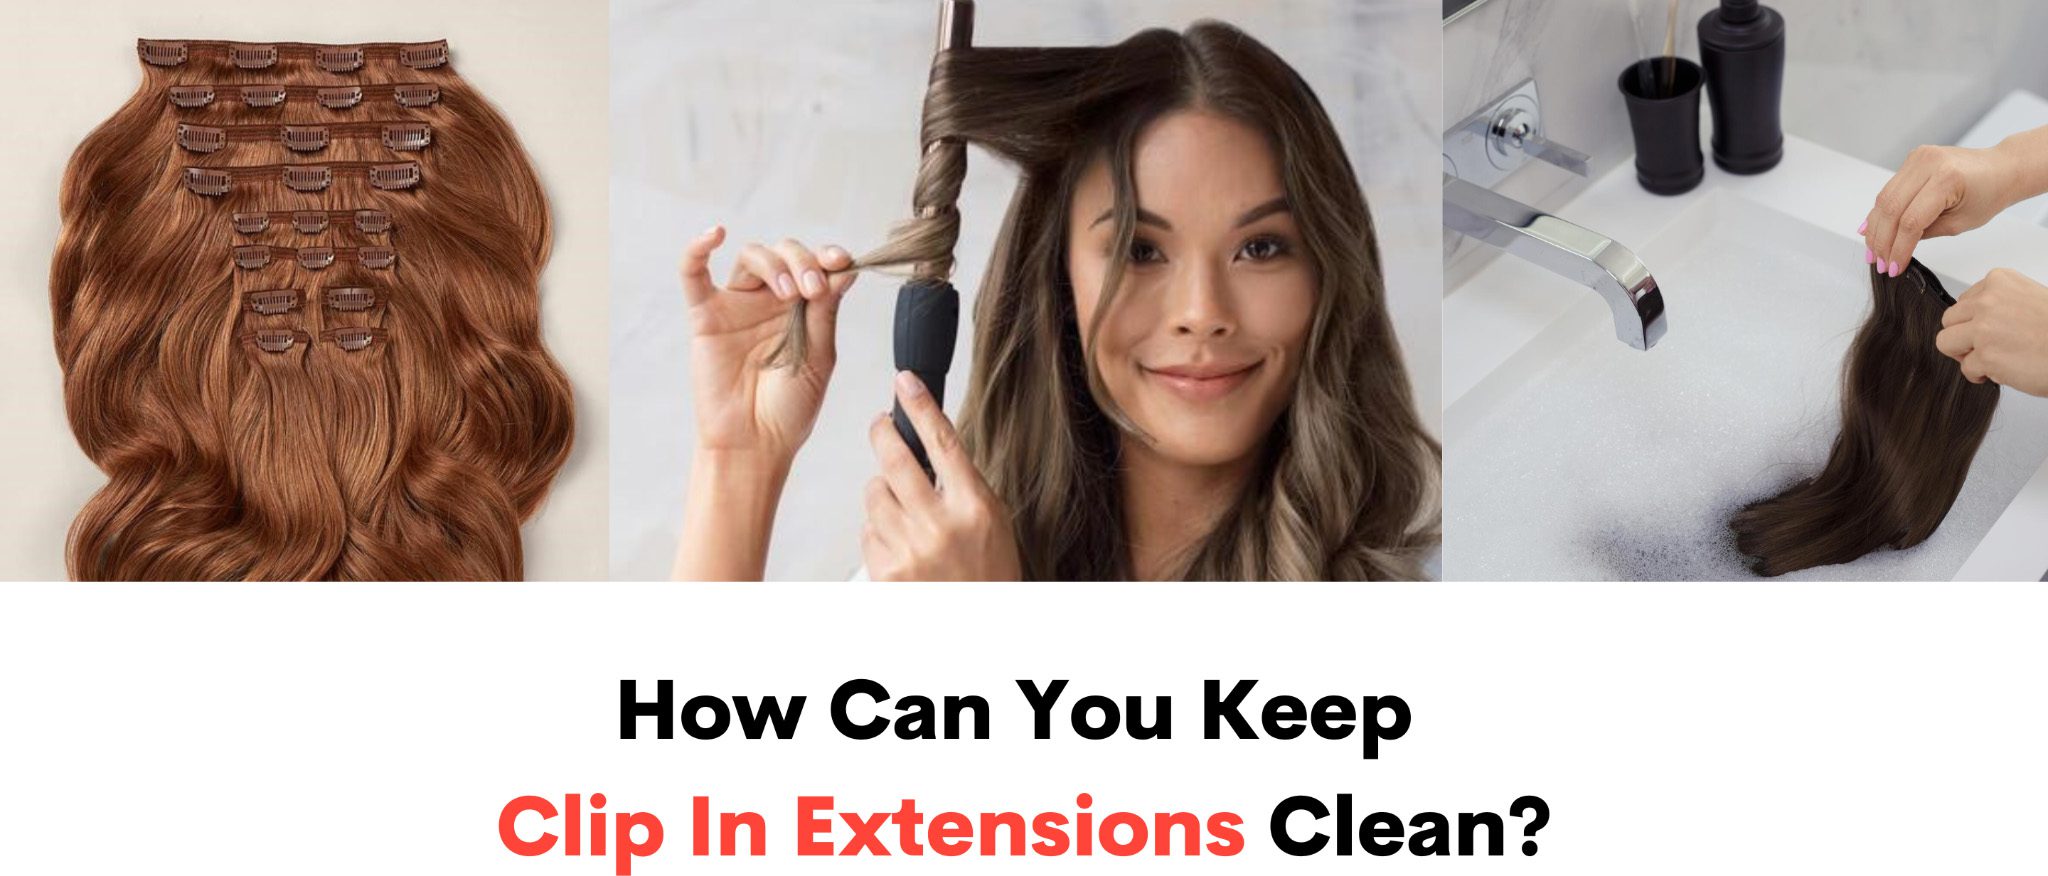 How Can You Keep Clip-in Extensions Clean?